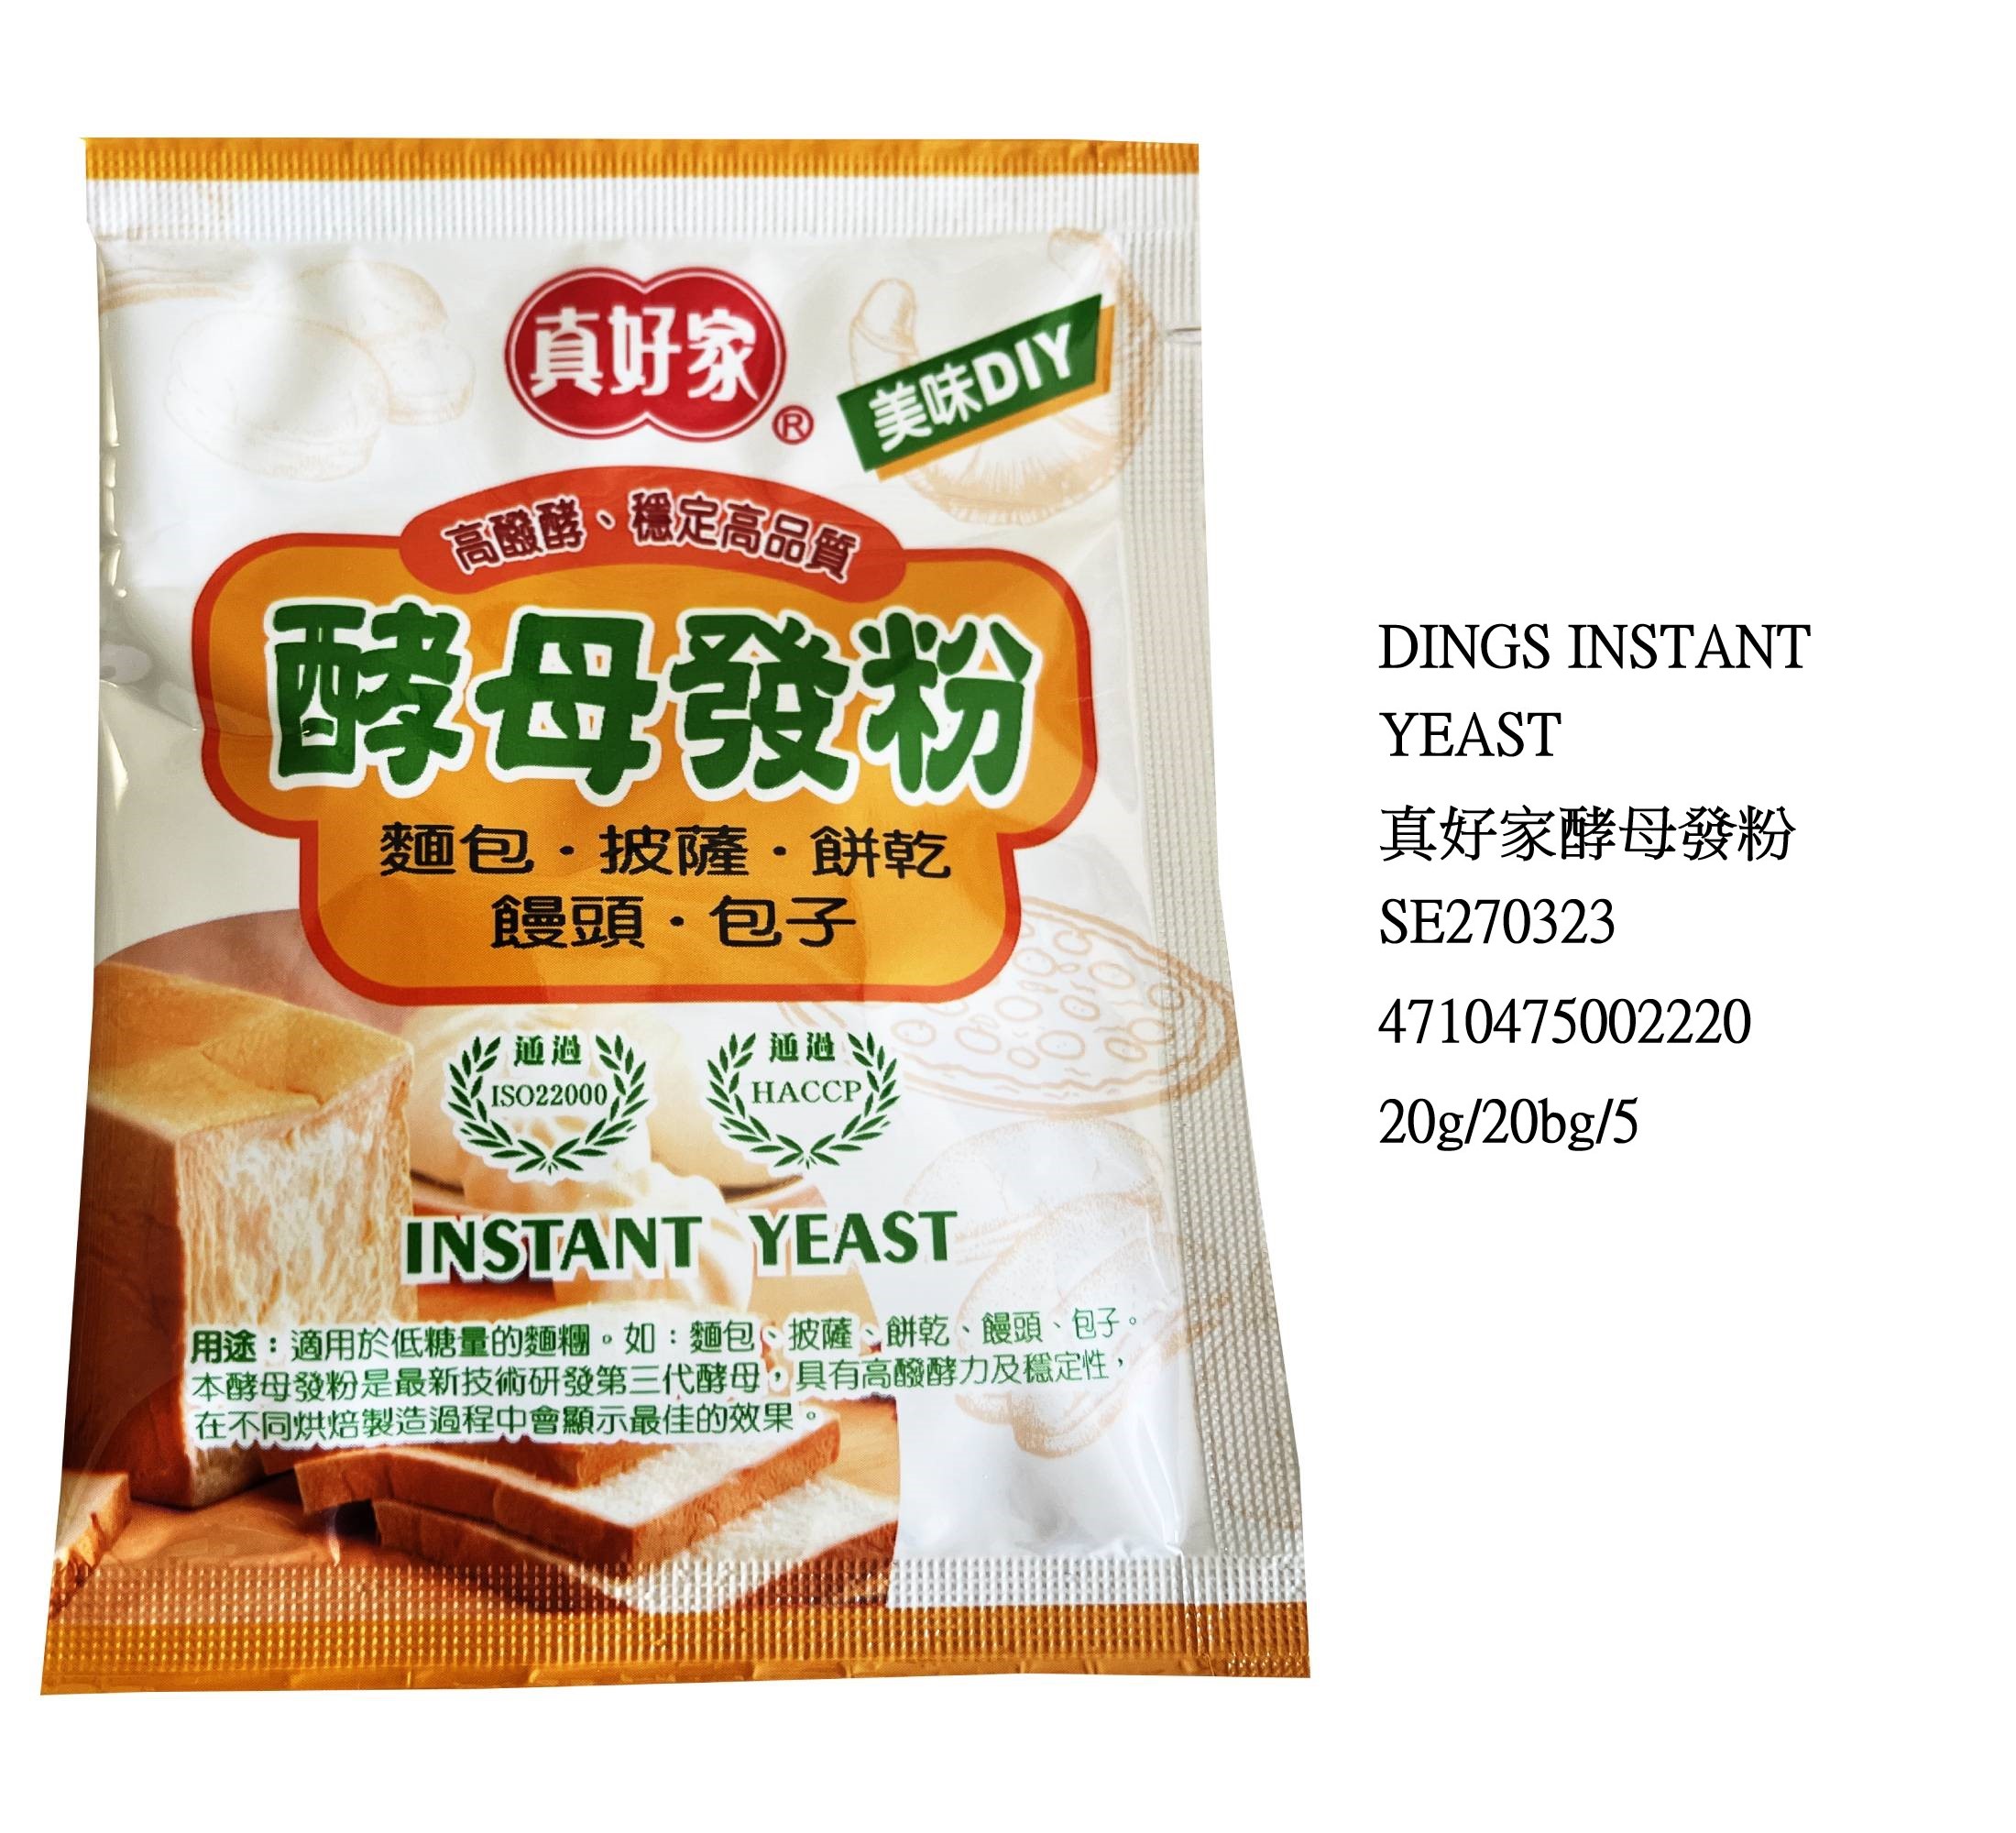 DINGS INSTANT YEAST SE270323